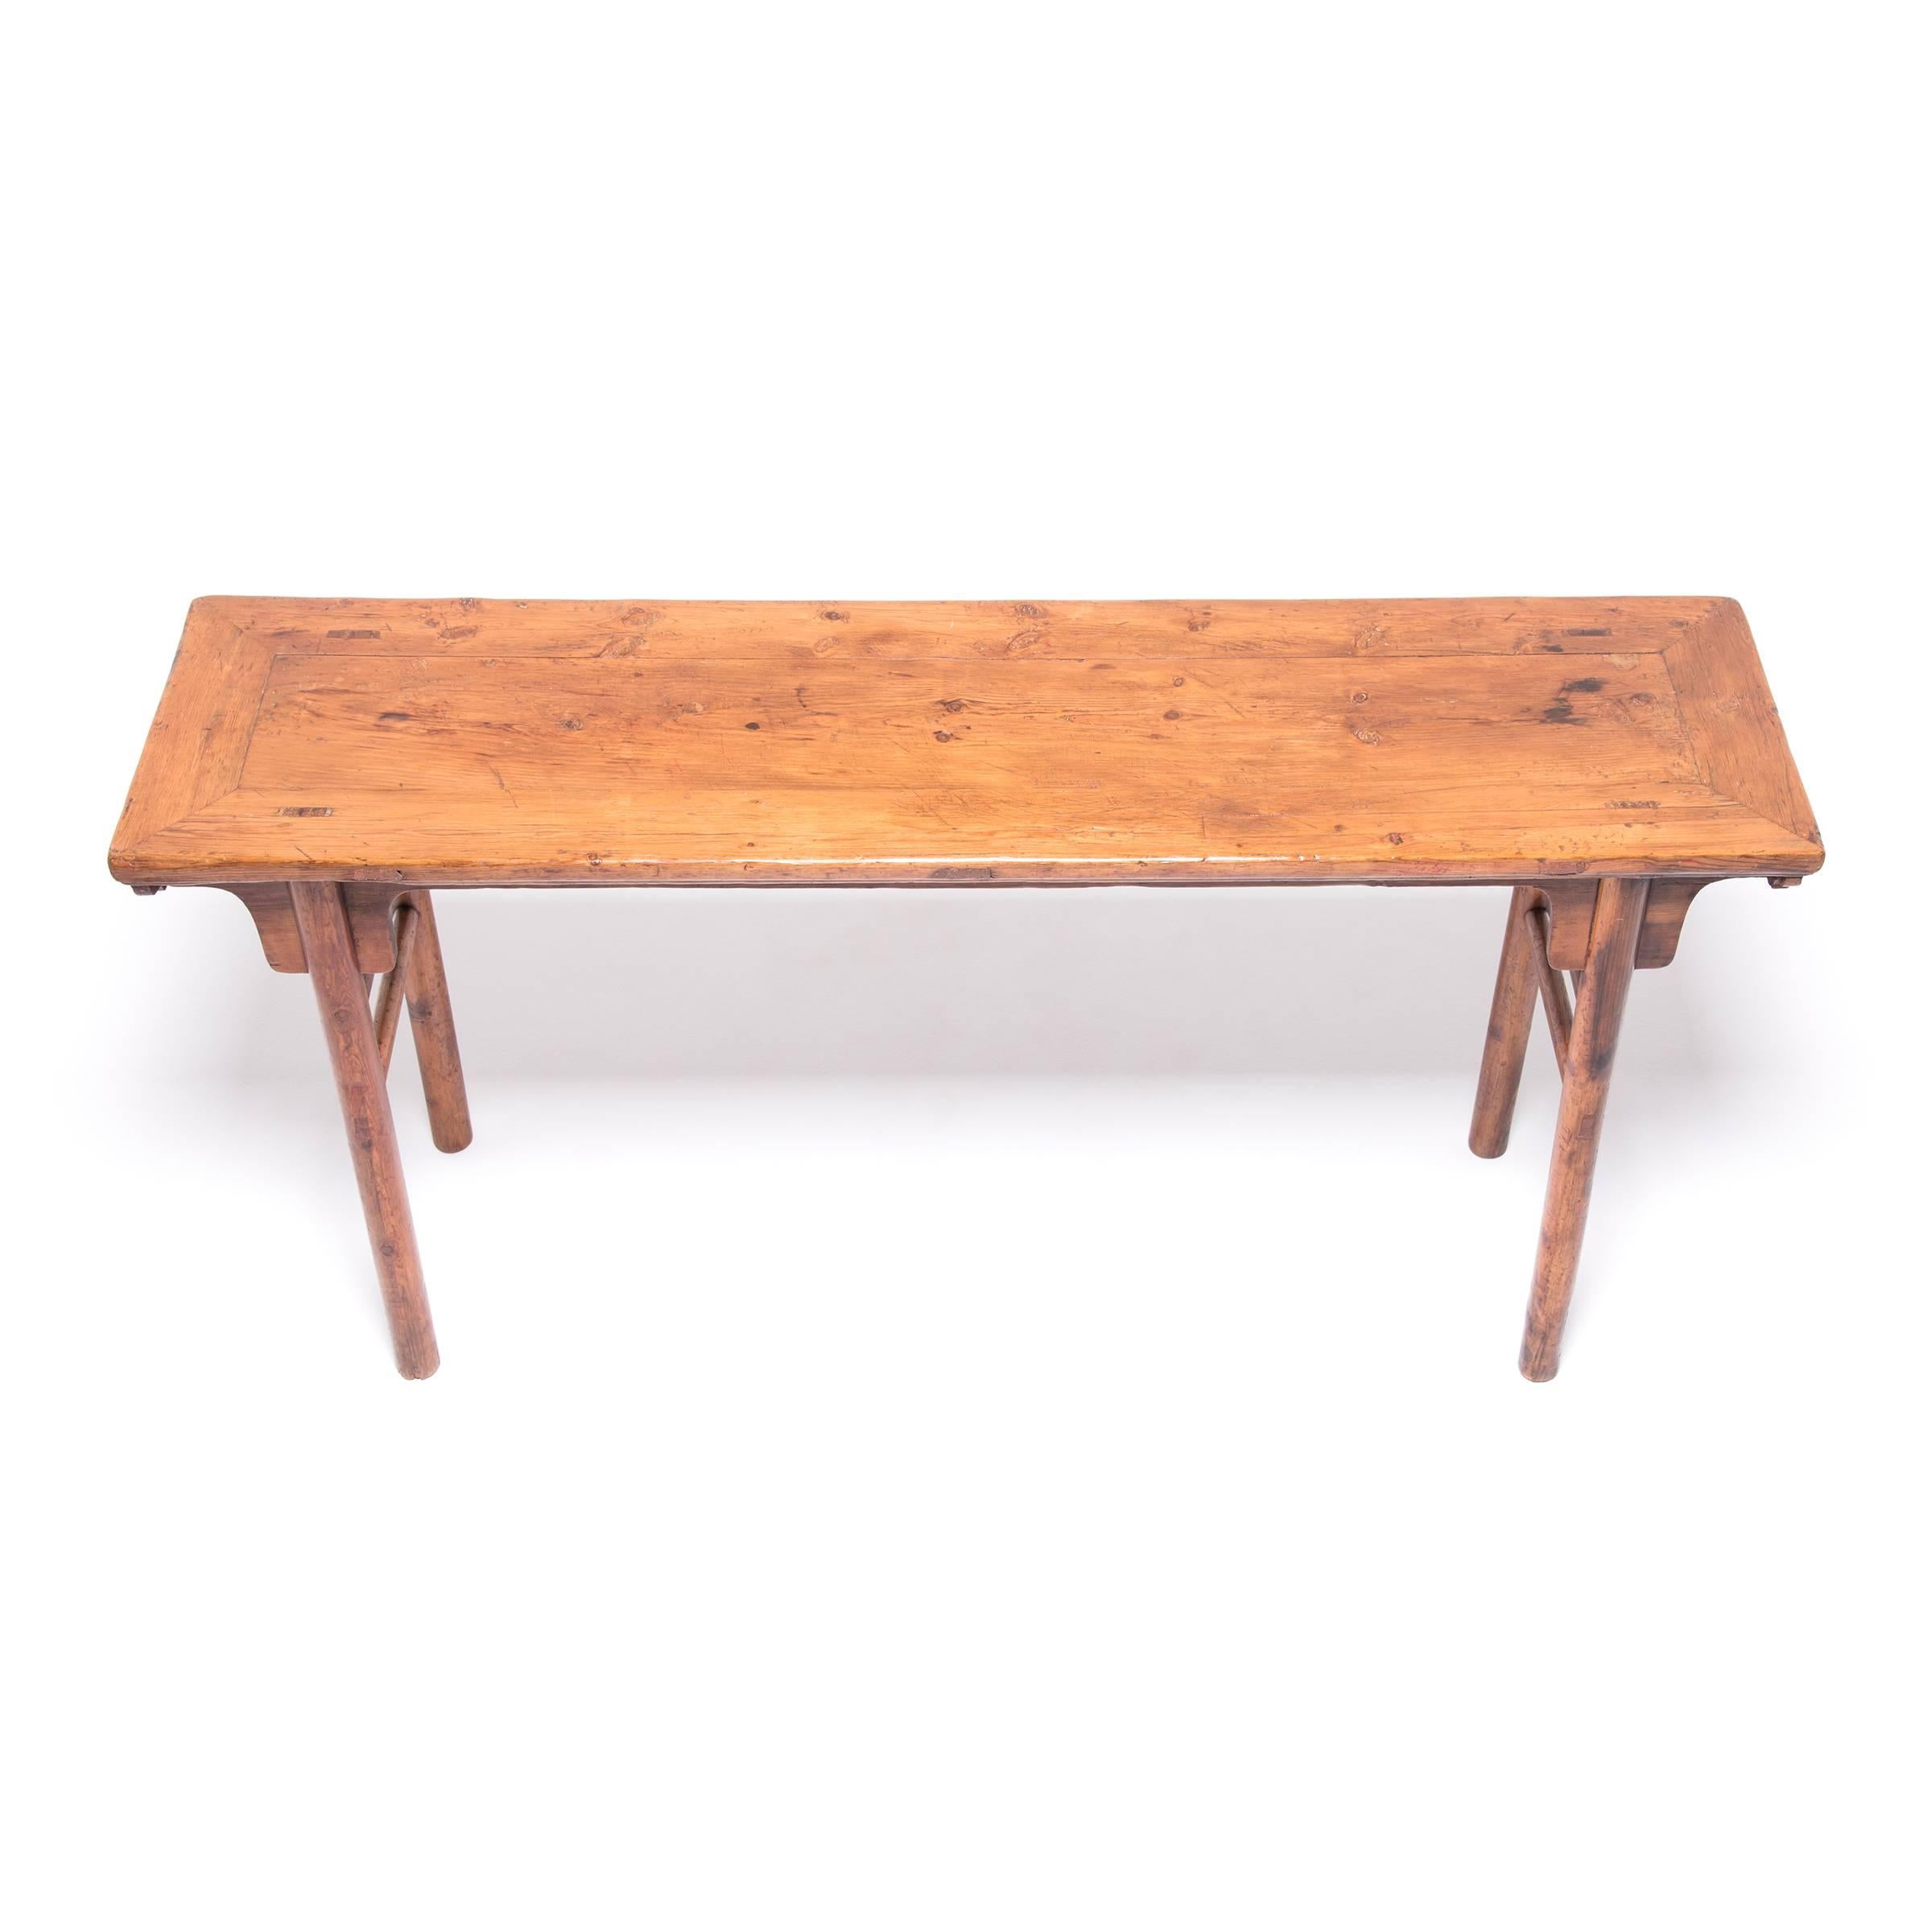 Over 150 years ago this splendid cypress wood table sat as the centerpiece in a family’s home in China's Shanxi Province. It probably served as their altar, the place where they paid respects to their revered ancestors. The elegant table is inspired